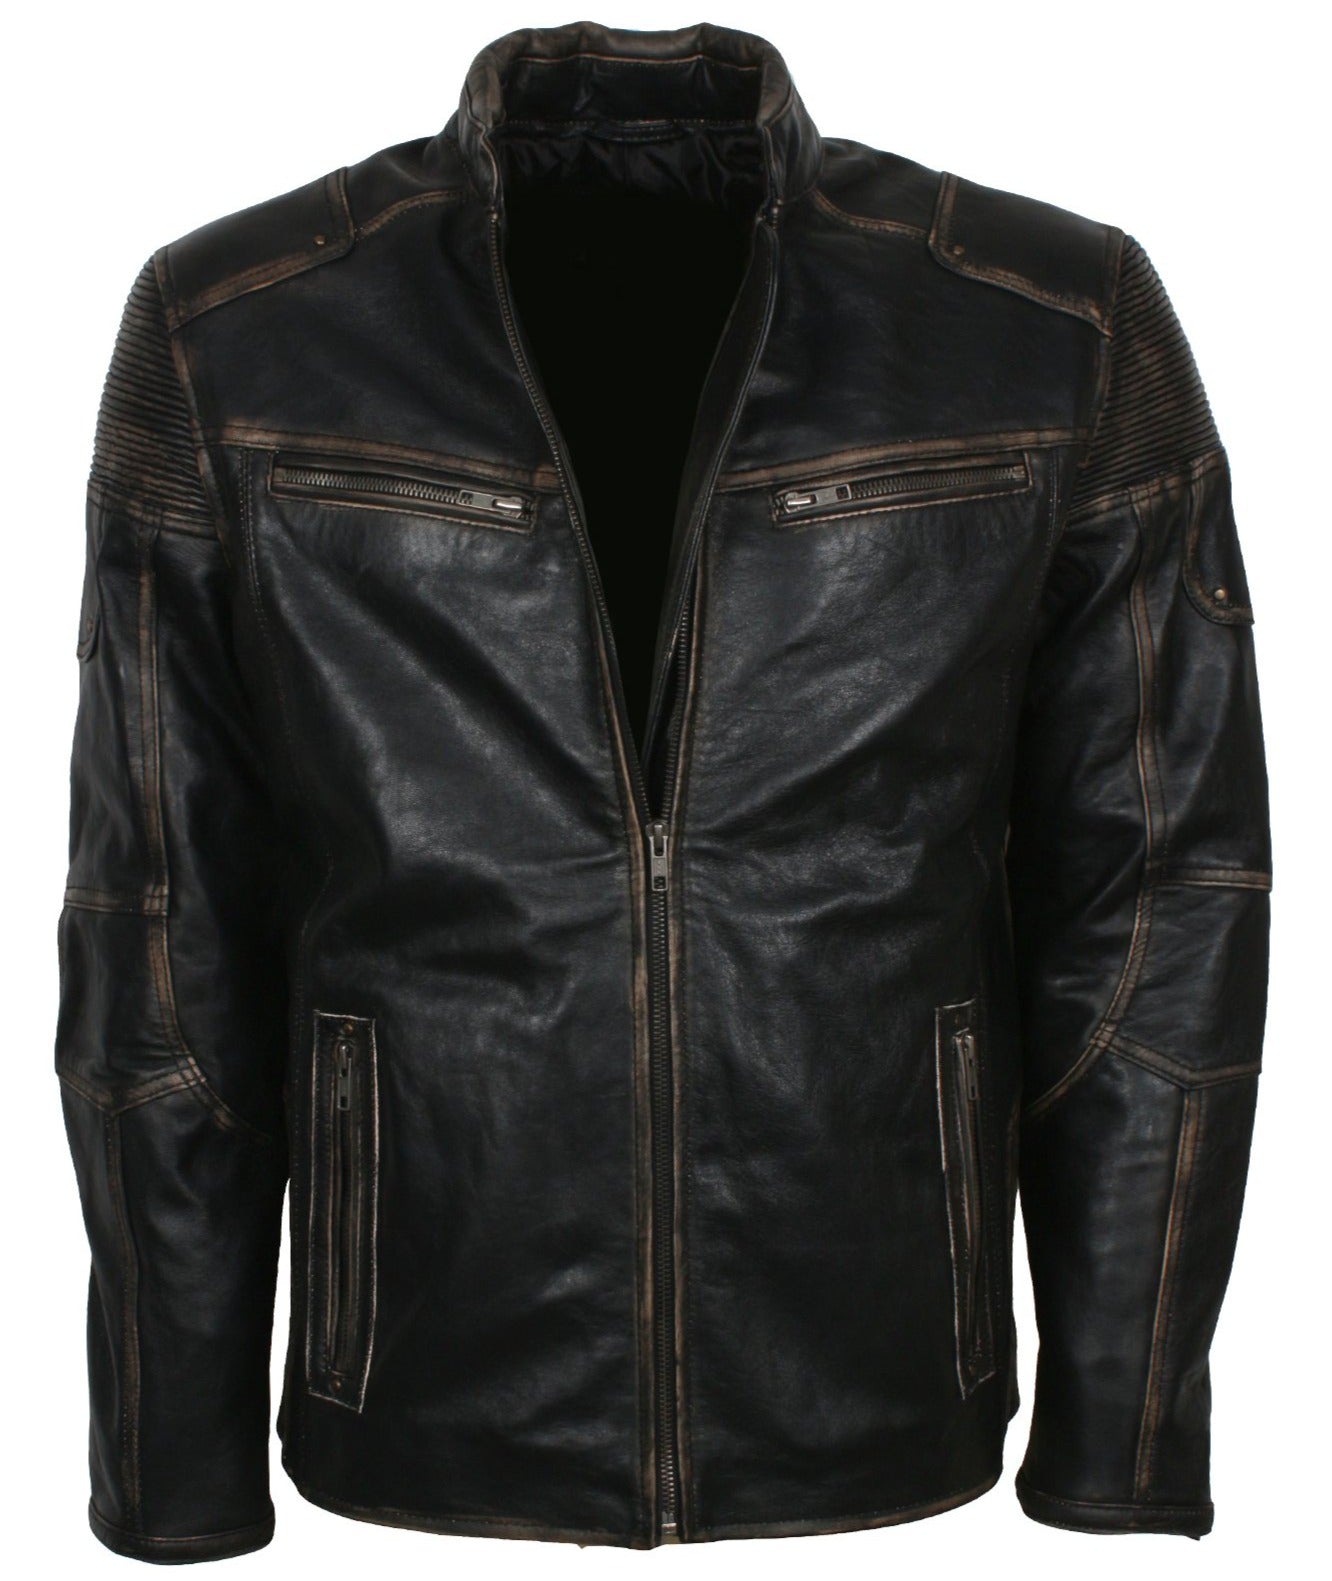 Distressed Leather Jacket Bikers In Leather